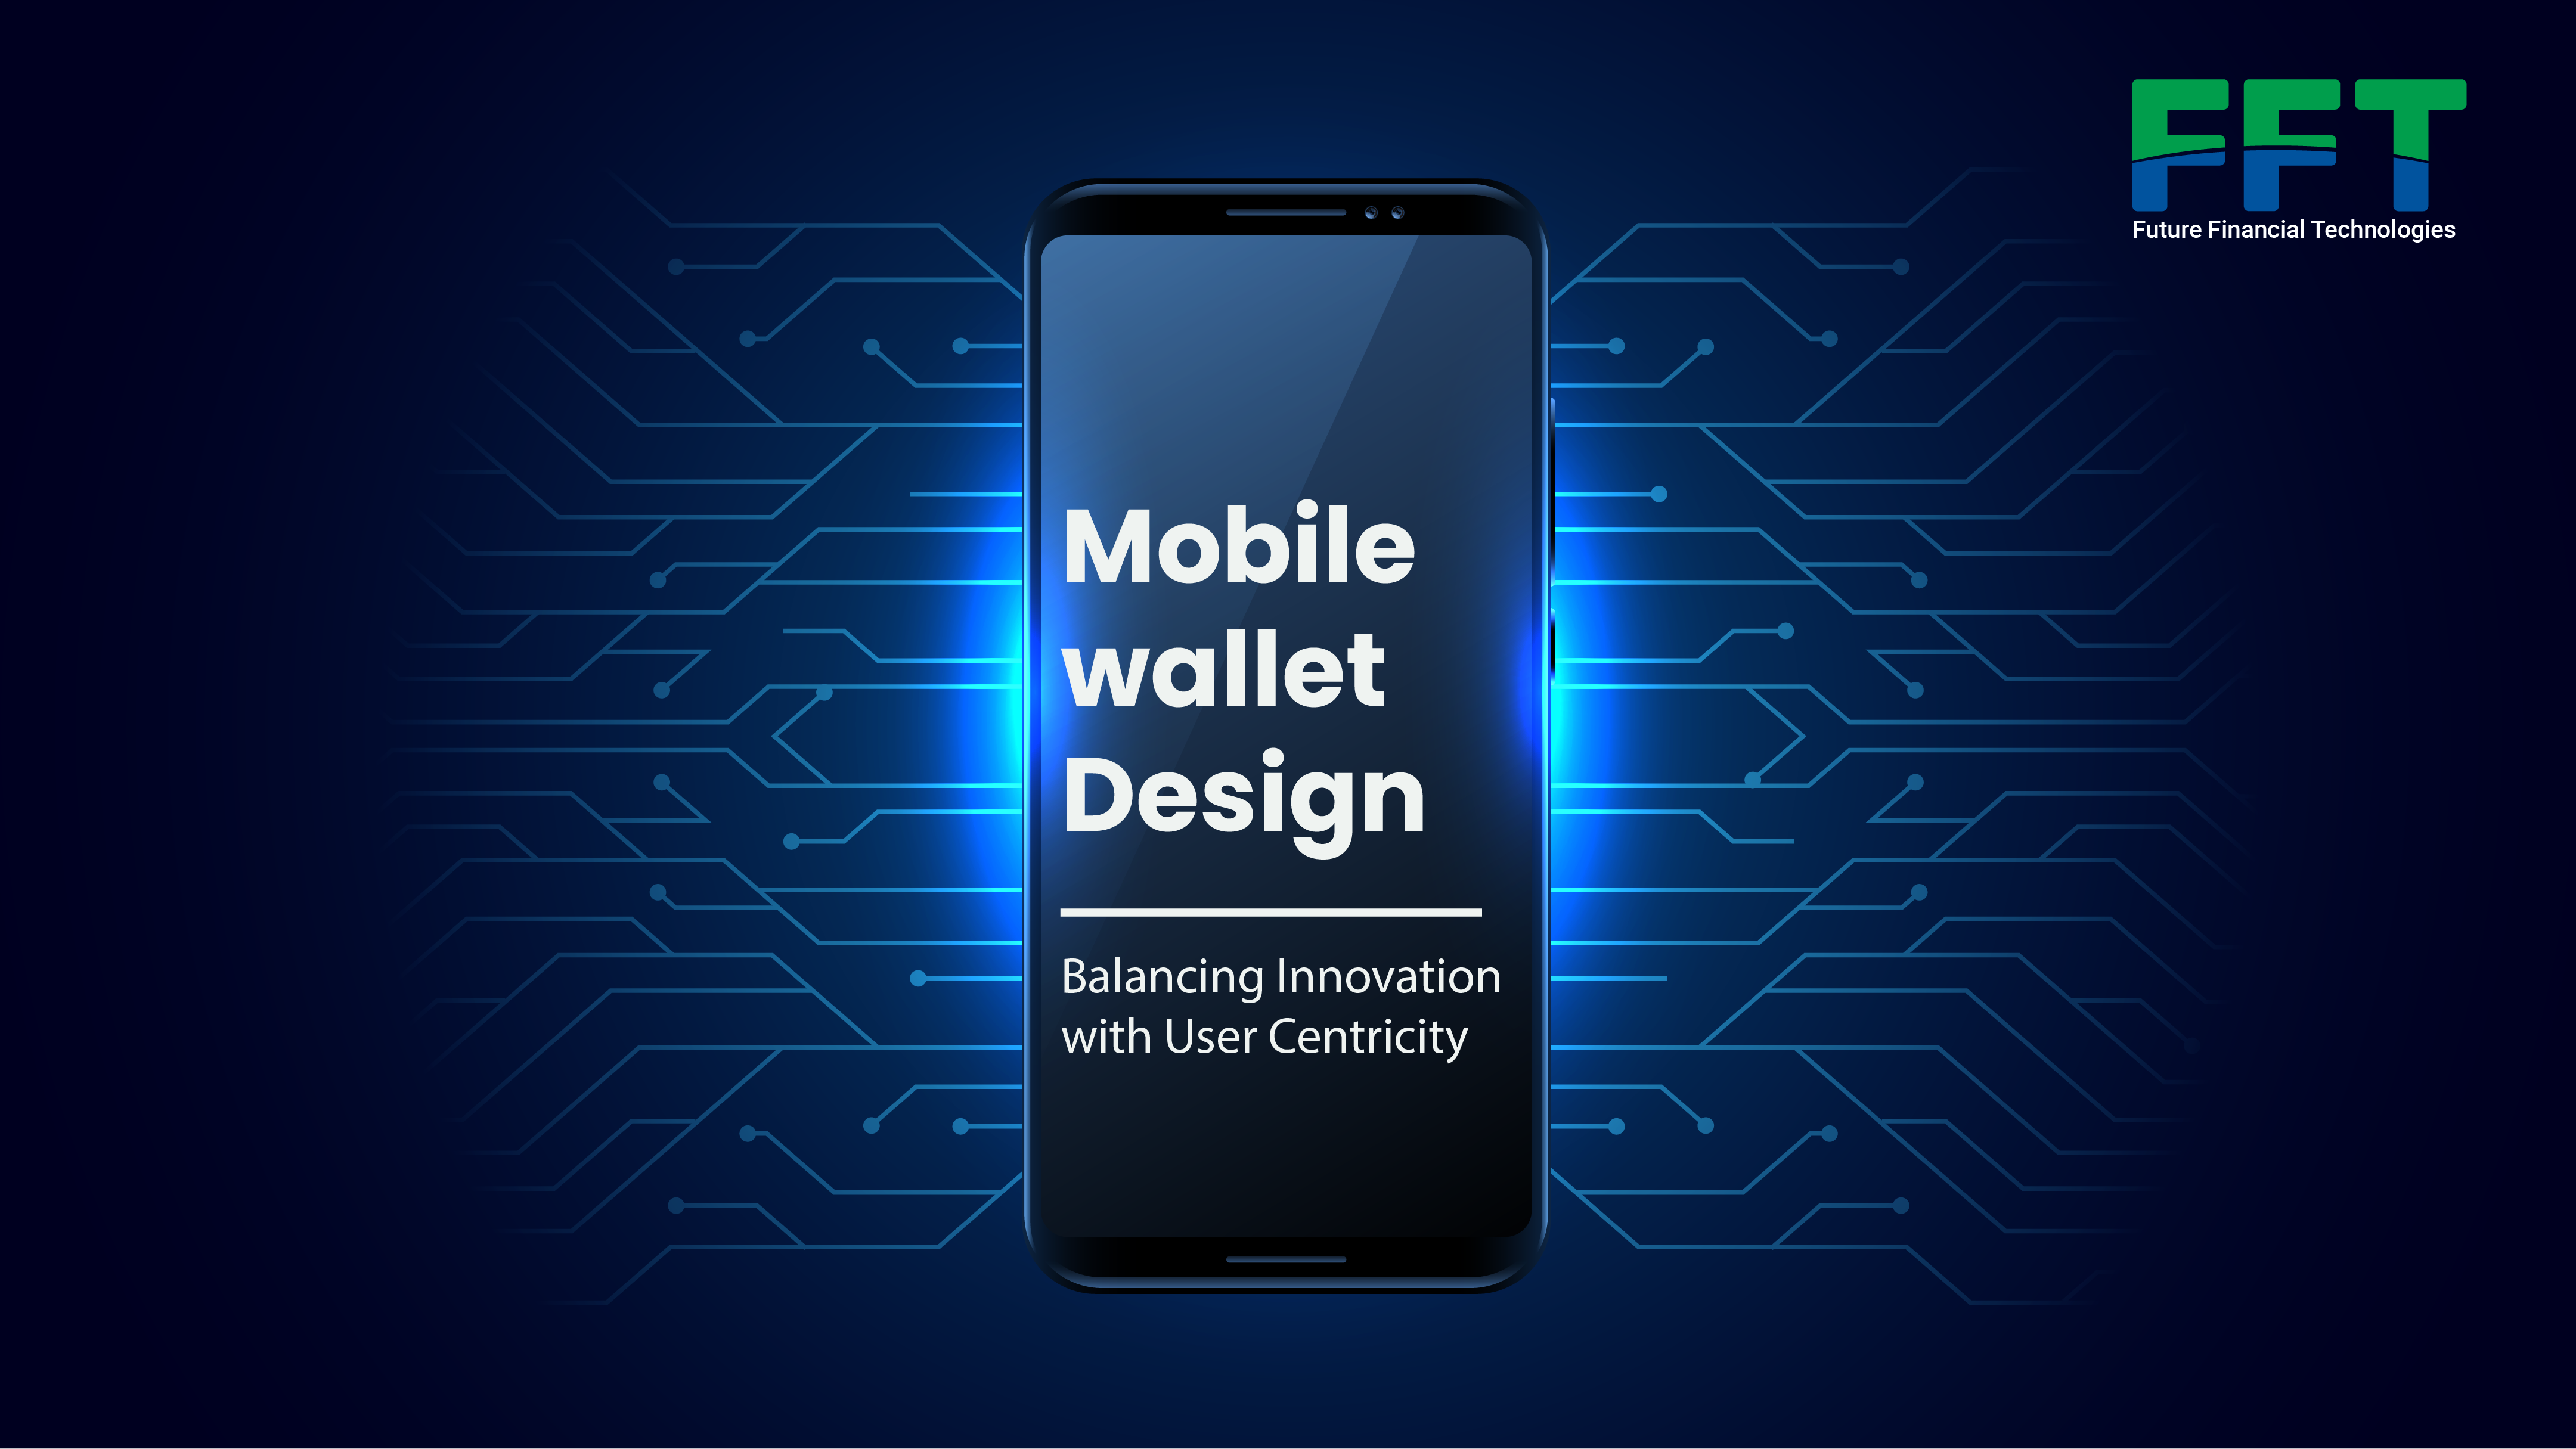 Mobile wallet Design: Balancing Innovation with User Centricity